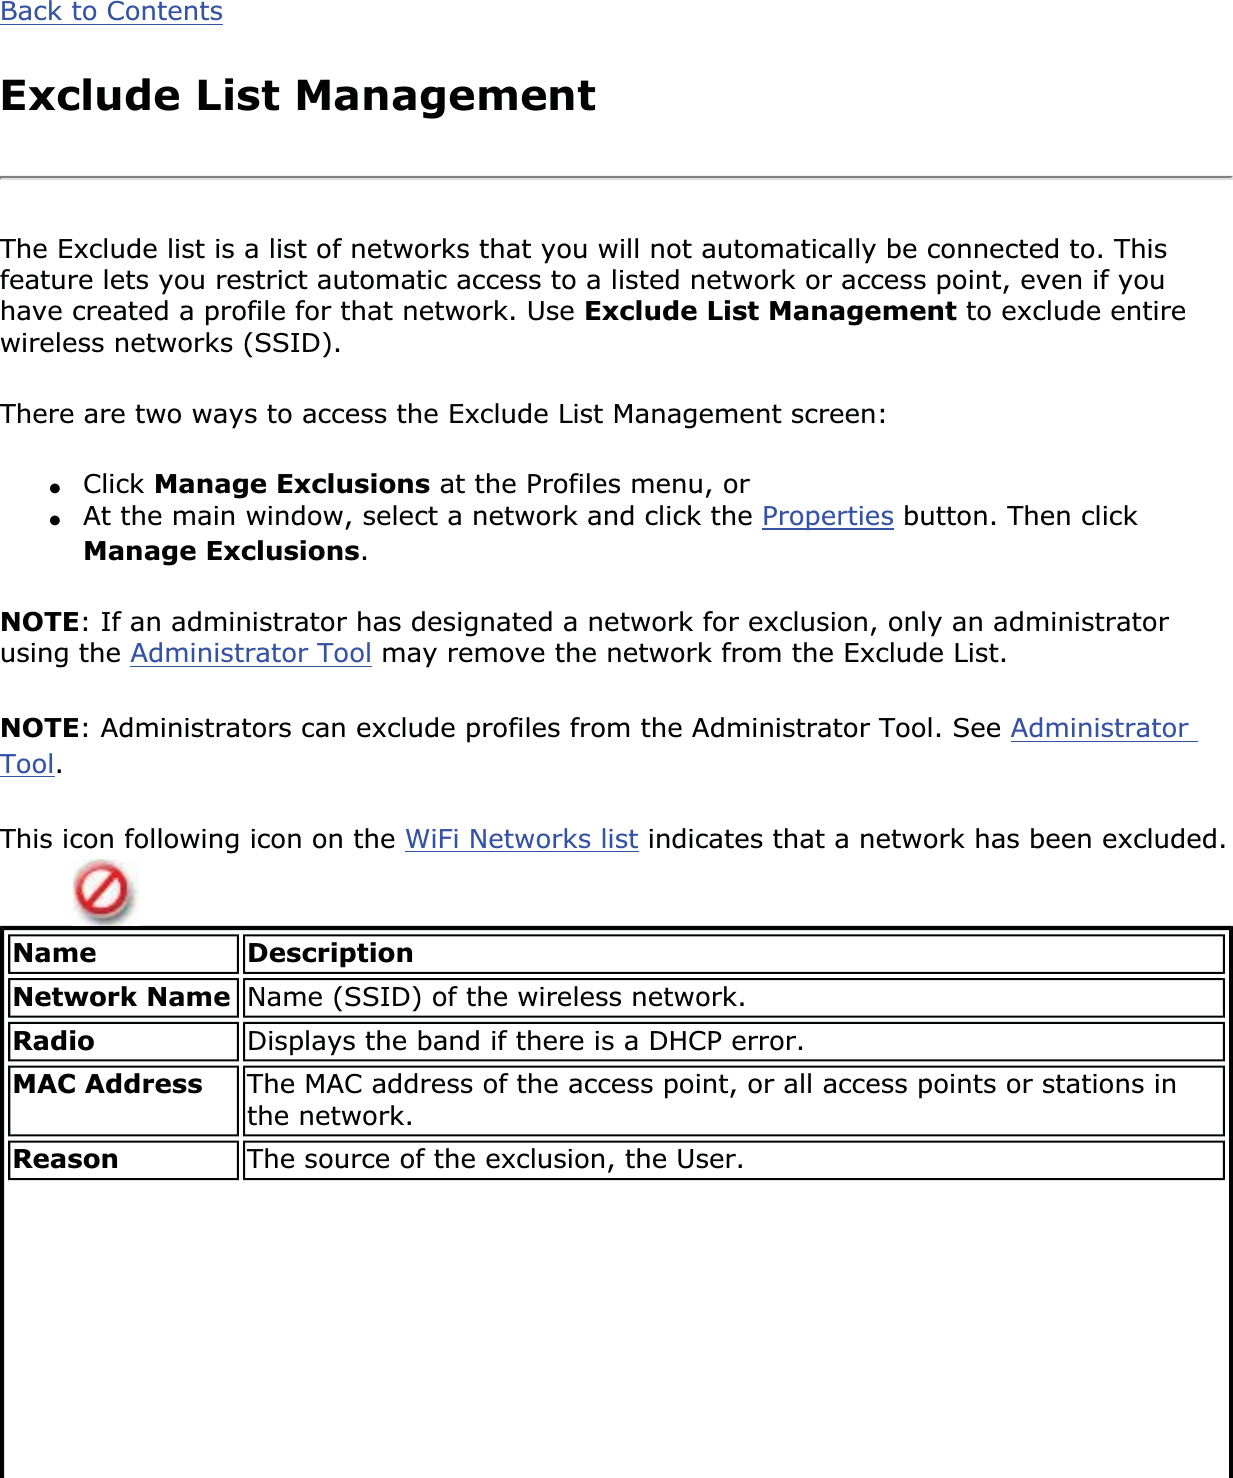 Back to ContentsExclude List ManagementThe Exclude list is a list of networks that you will not automatically be connected to. This feature lets you restrict automatic access to a listed network or access point, even if you have created a profile for that network. Use Exclude List Management to exclude entire wireless networks (SSID).There are two ways to access the Exclude List Management screen:●Click Manage Exclusions at the Profiles menu, or ●At the main window, select a network and click the Properties button. Then click Manage Exclusions.NOTE: If an administrator has designated a network for exclusion, only an administrator using the Administrator Tool may remove the network from the Exclude List.NOTE: Administrators can exclude profiles from the Administrator Tool. See AdministratorTool.This icon following icon on the WiFi Networks list indicates that a network has been excluded.Name DescriptionNetwork Name Name (SSID) of the wireless network.Radio Displays the band if there is a DHCP error.MAC Address The MAC address of the access point, or all access points or stations in the network. Reason The source of the exclusion, the User.